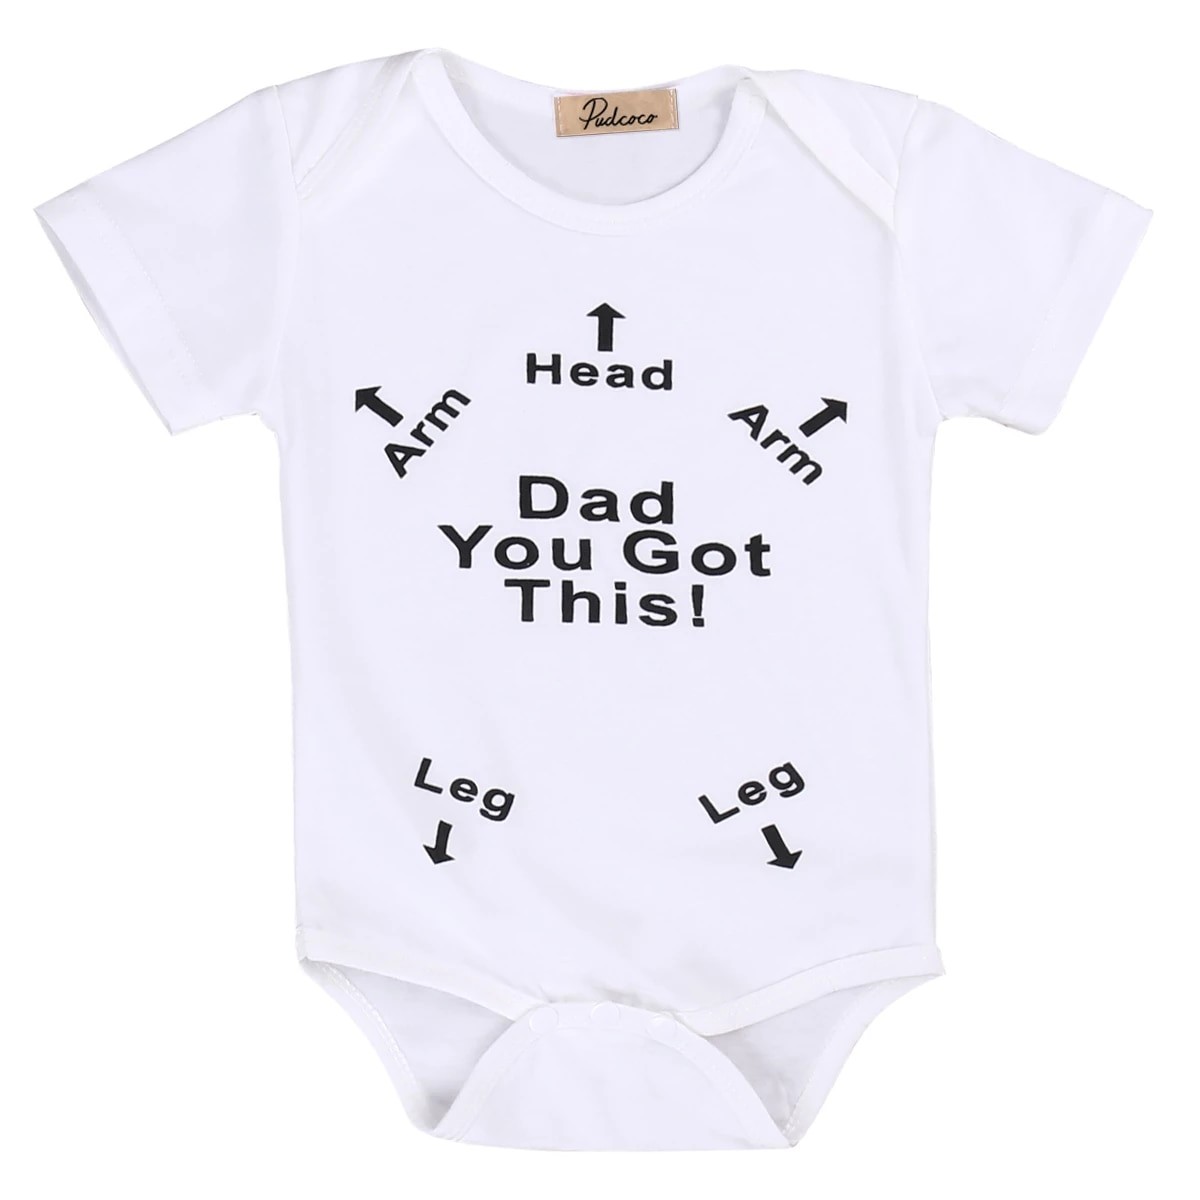 Baby bodysuits are Comfortable Clothing For Your Babies